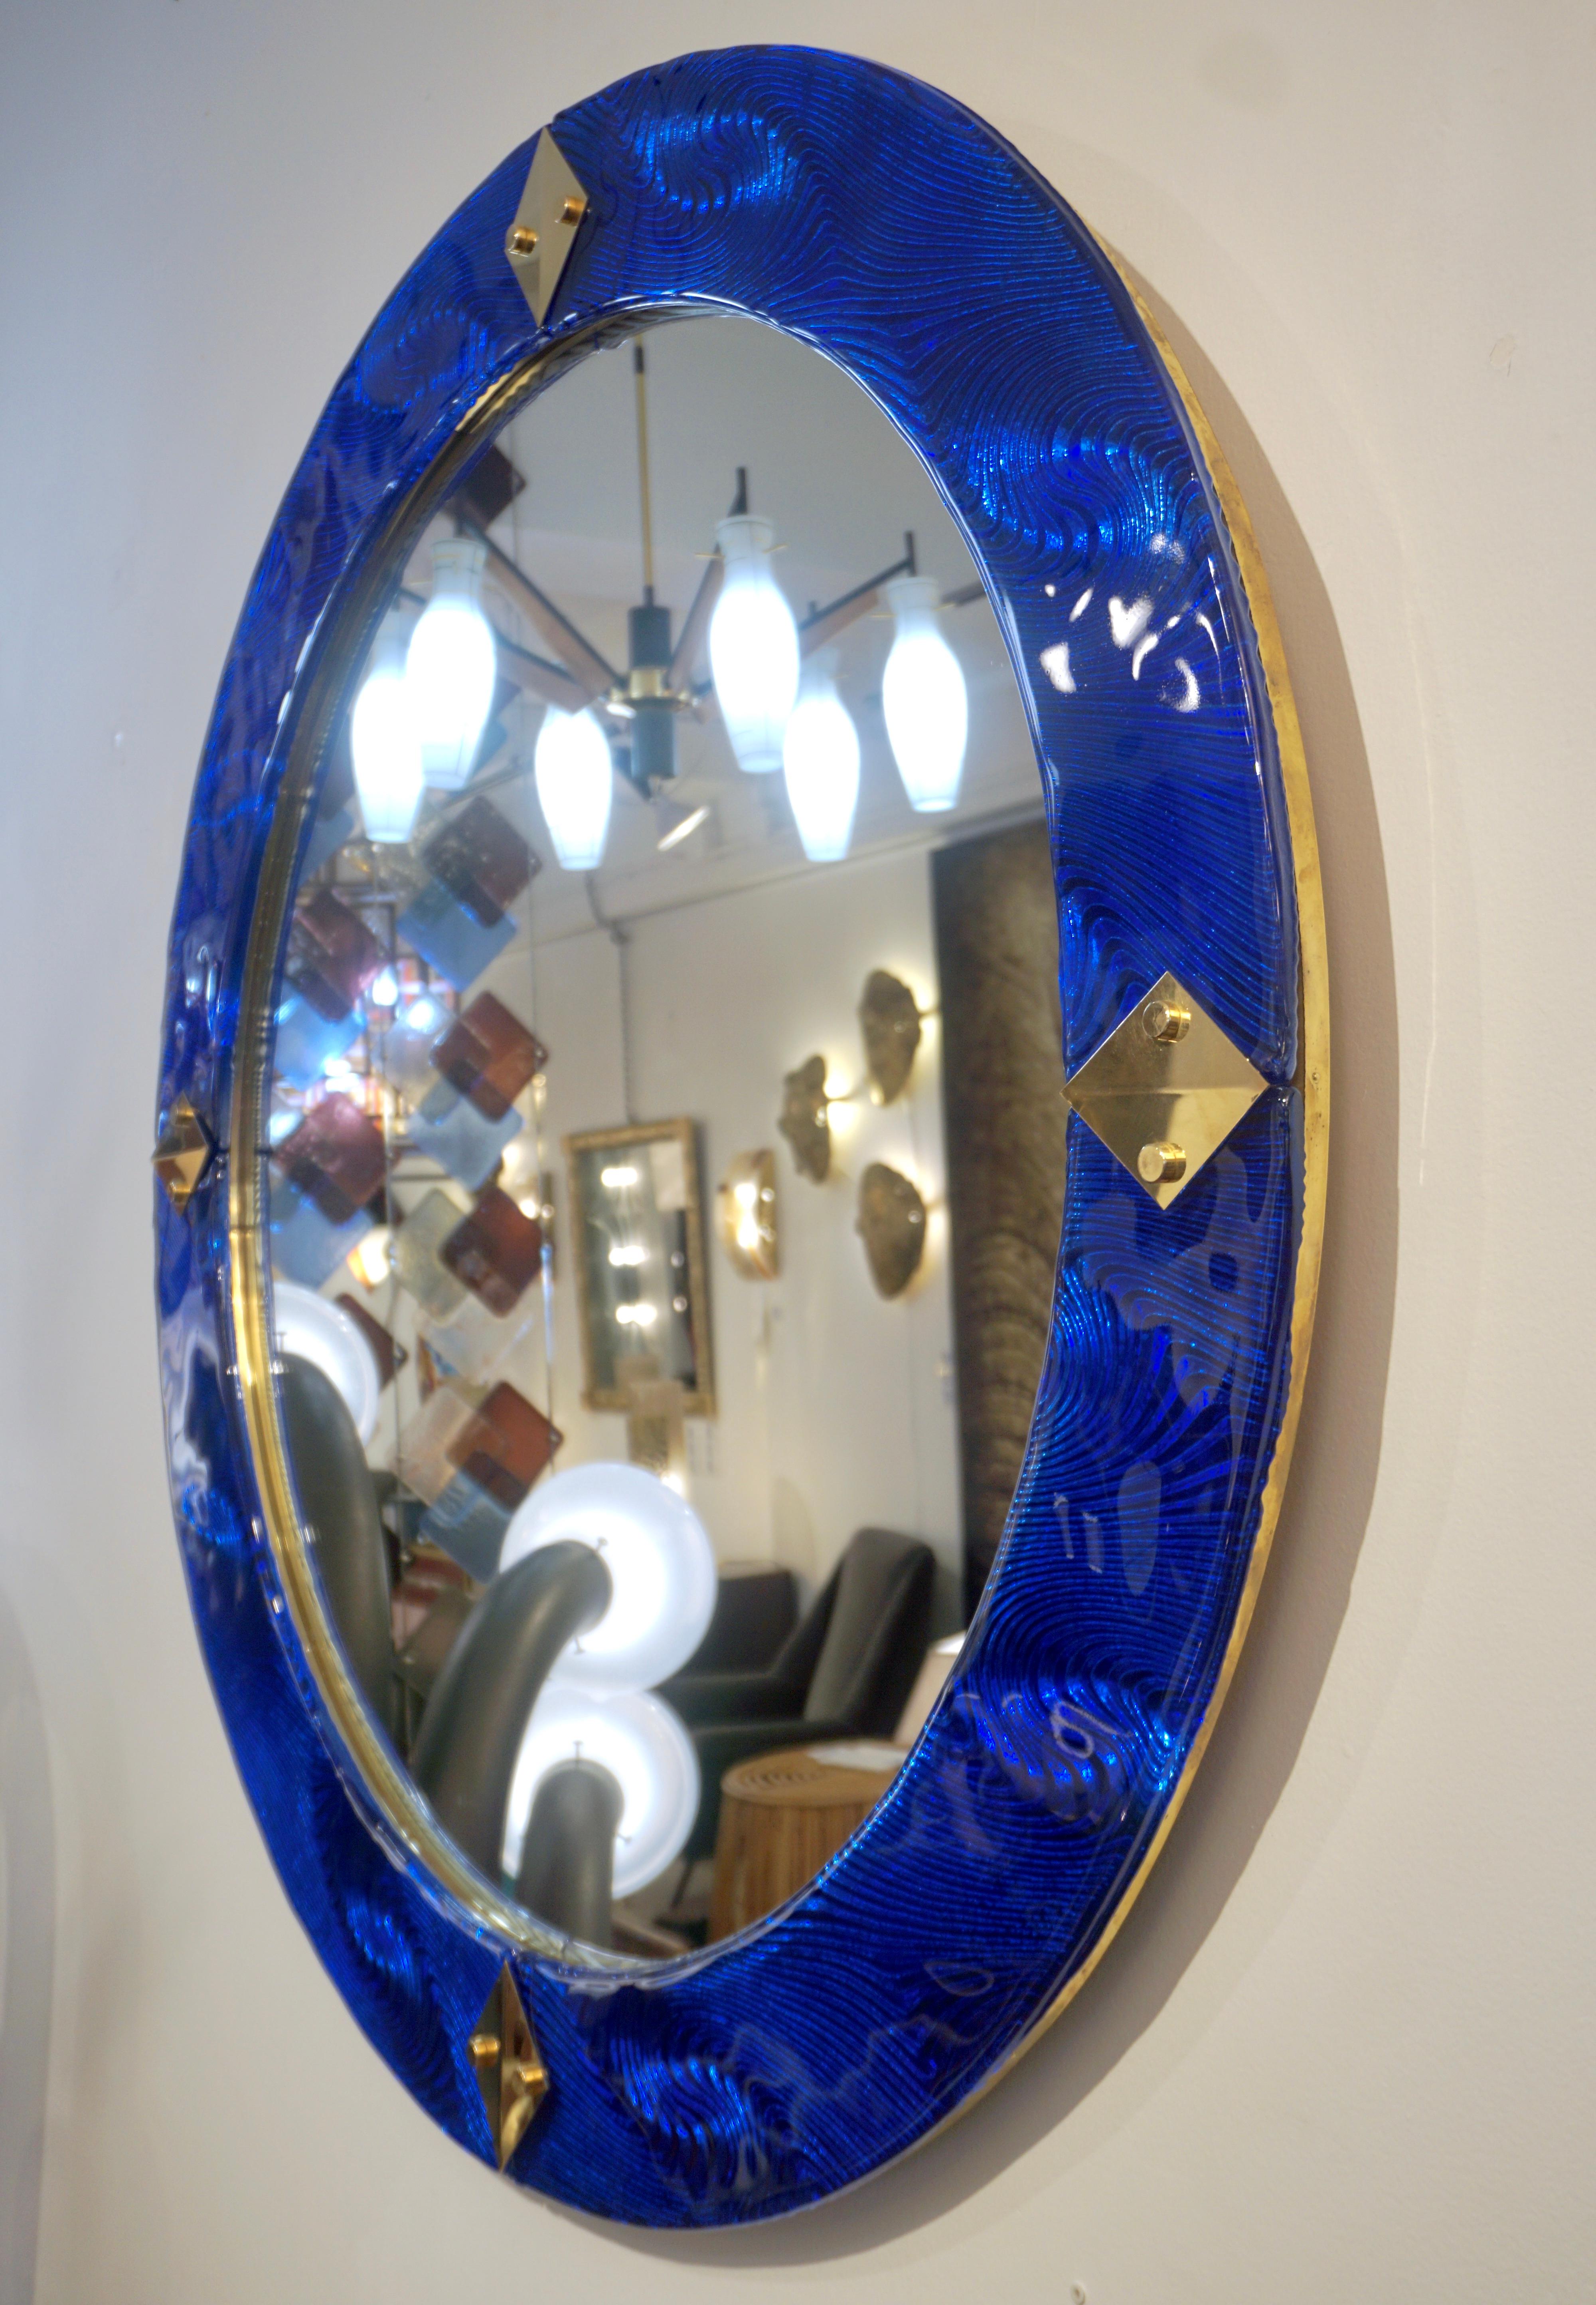 Venetian contemporary round wall mirror, custom made in Italy, framed with a thick border in high quality blown Murano Art glass in a vibrant royal blue sapphire color, artistically rounded at the edge and textured on the reverse with a unique waved